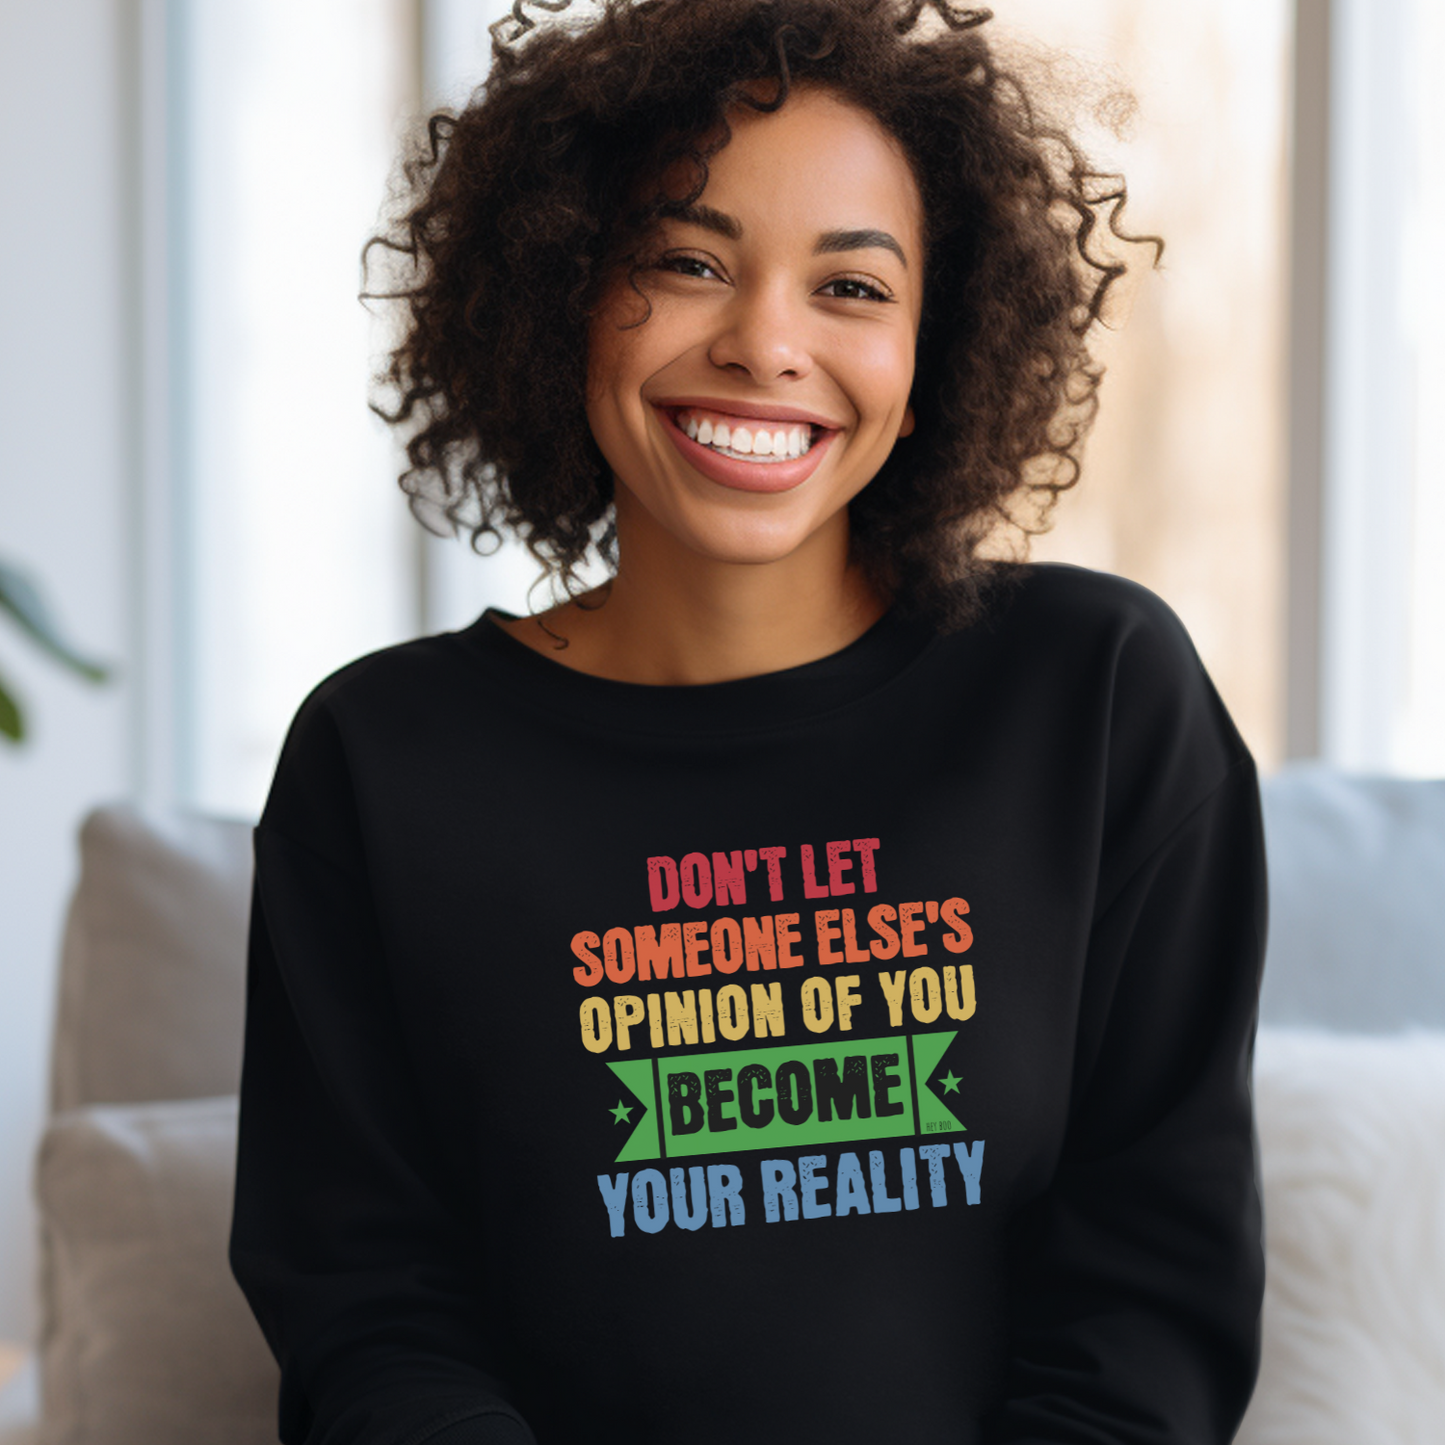 Black Gildan 18000 Sweatshirt. Stay true, Stay You: "Don't Let Someone Else's Opinion of You Become Your Reality."